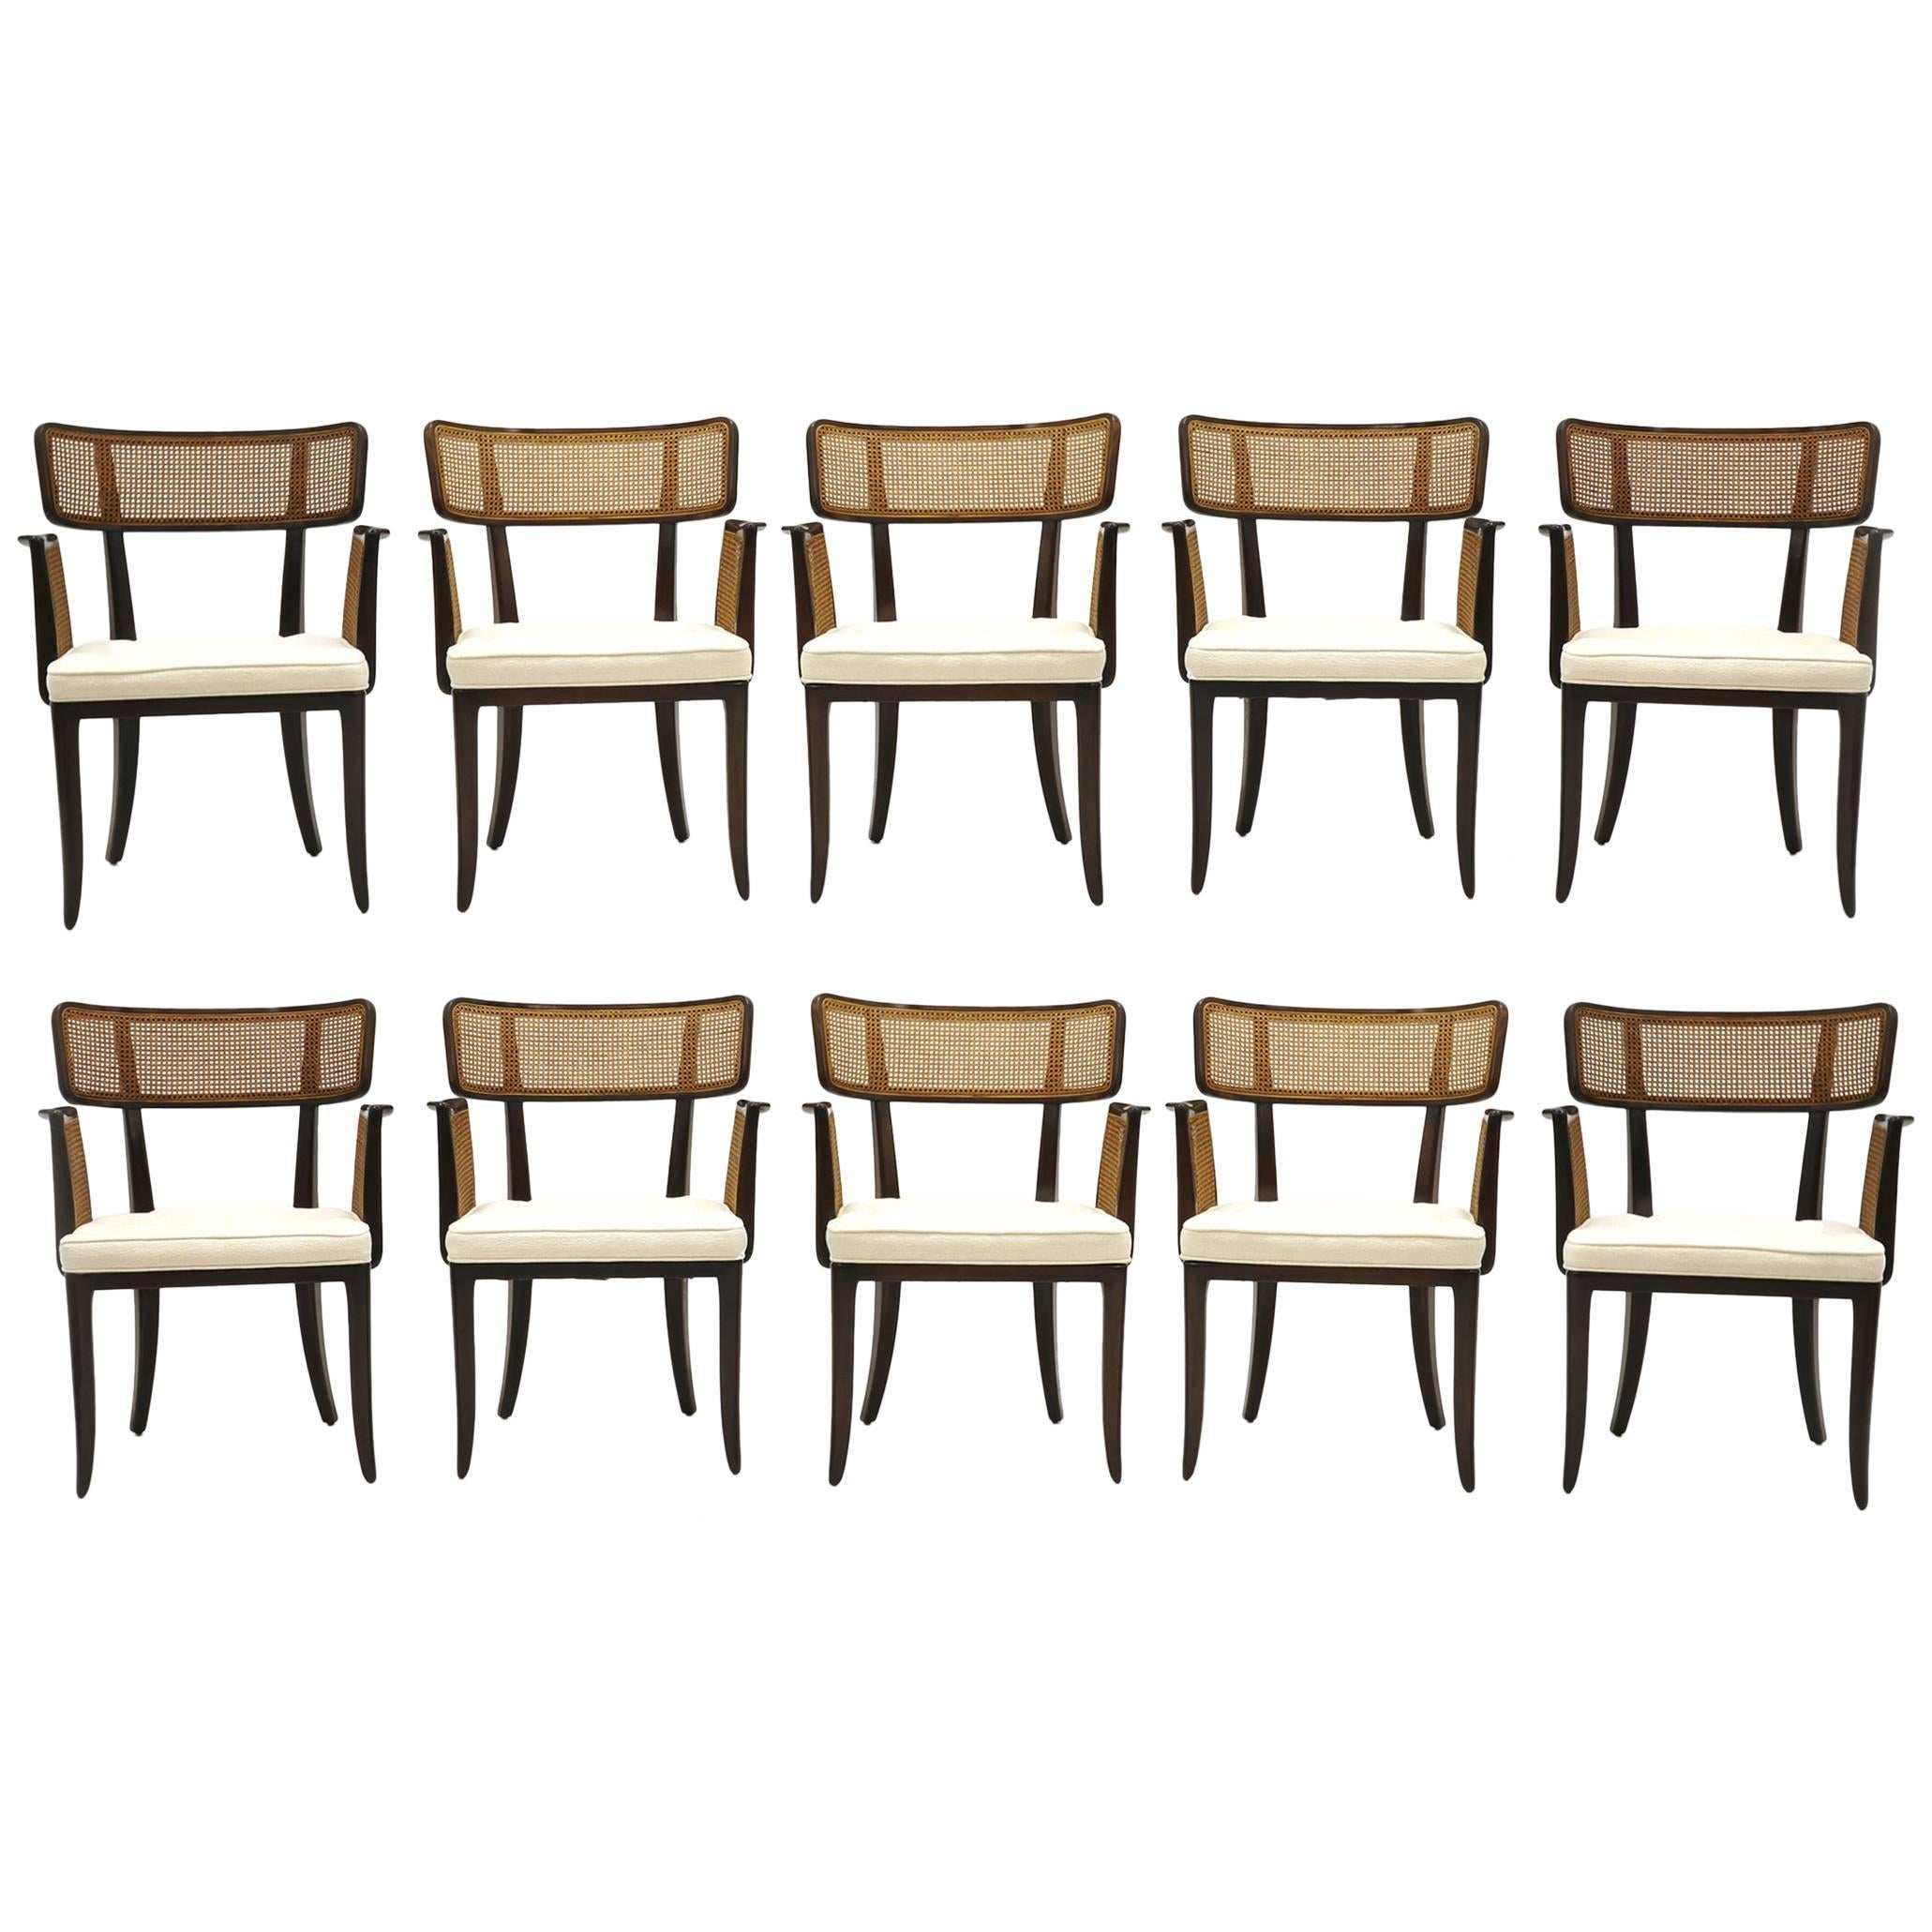 Set of Ten Edward Wormley for Dunbar Dining Chairs with Arms